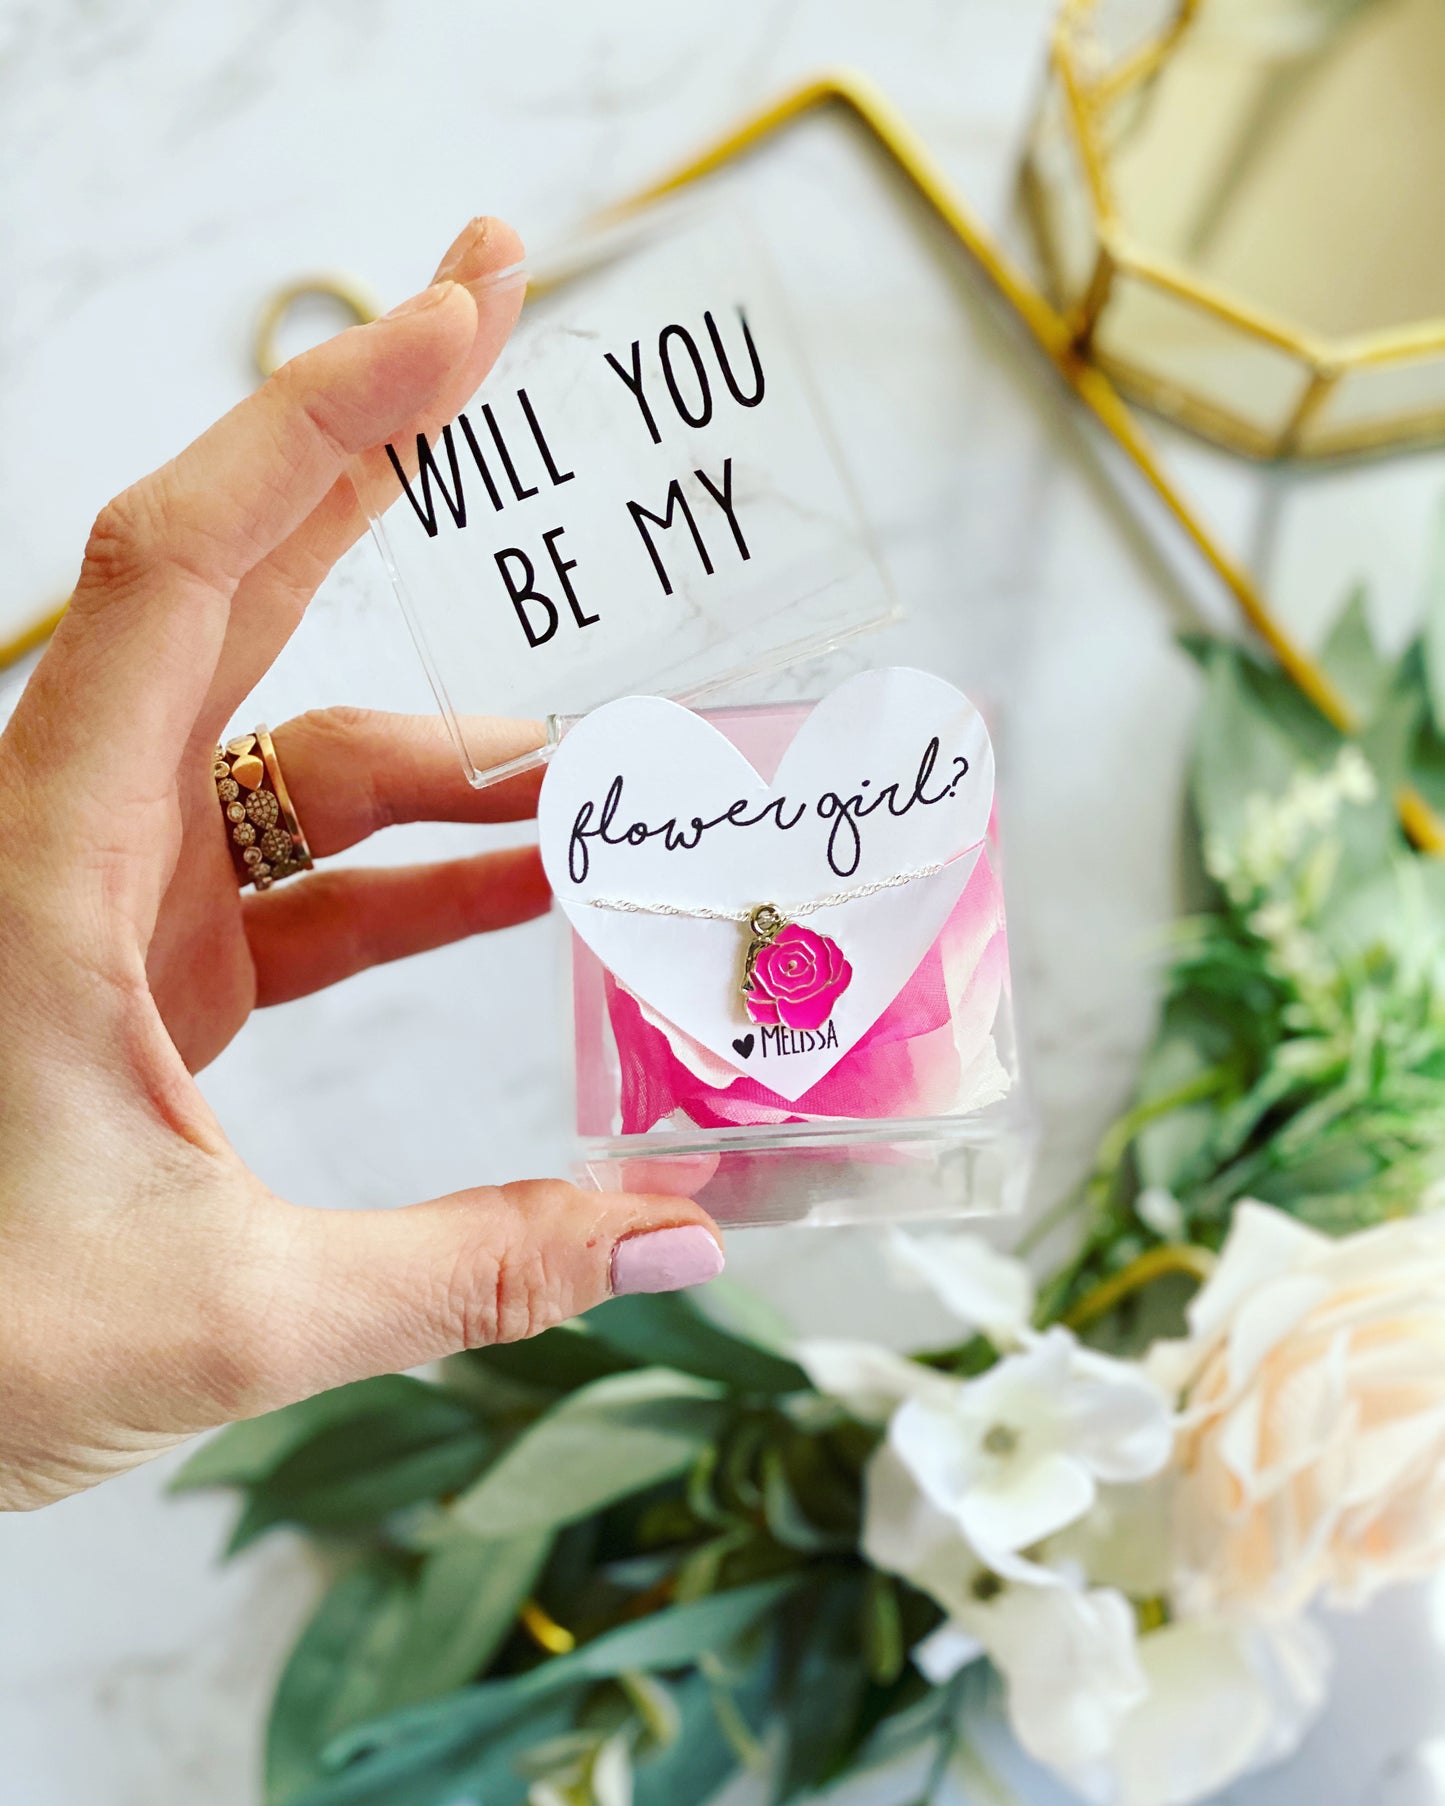 Will you be my... flower girl necklace and box!